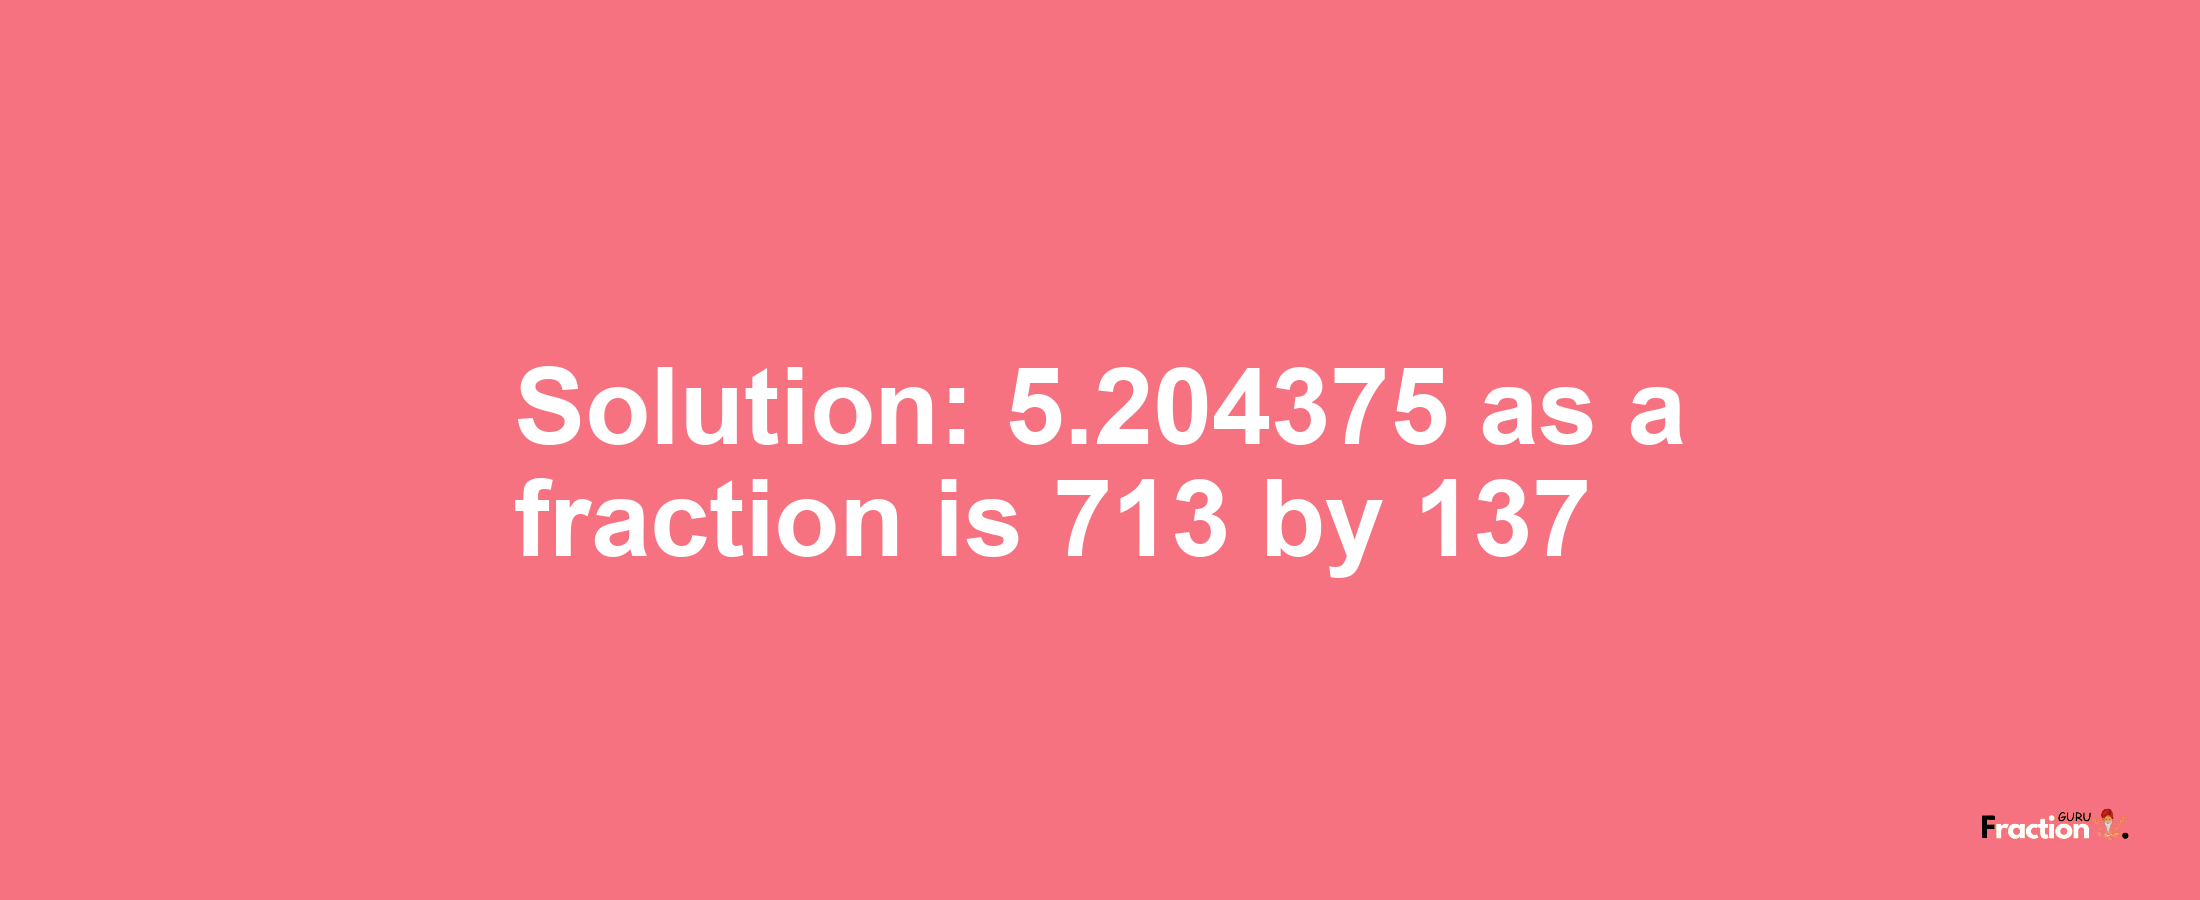 Solution:5.204375 as a fraction is 713/137